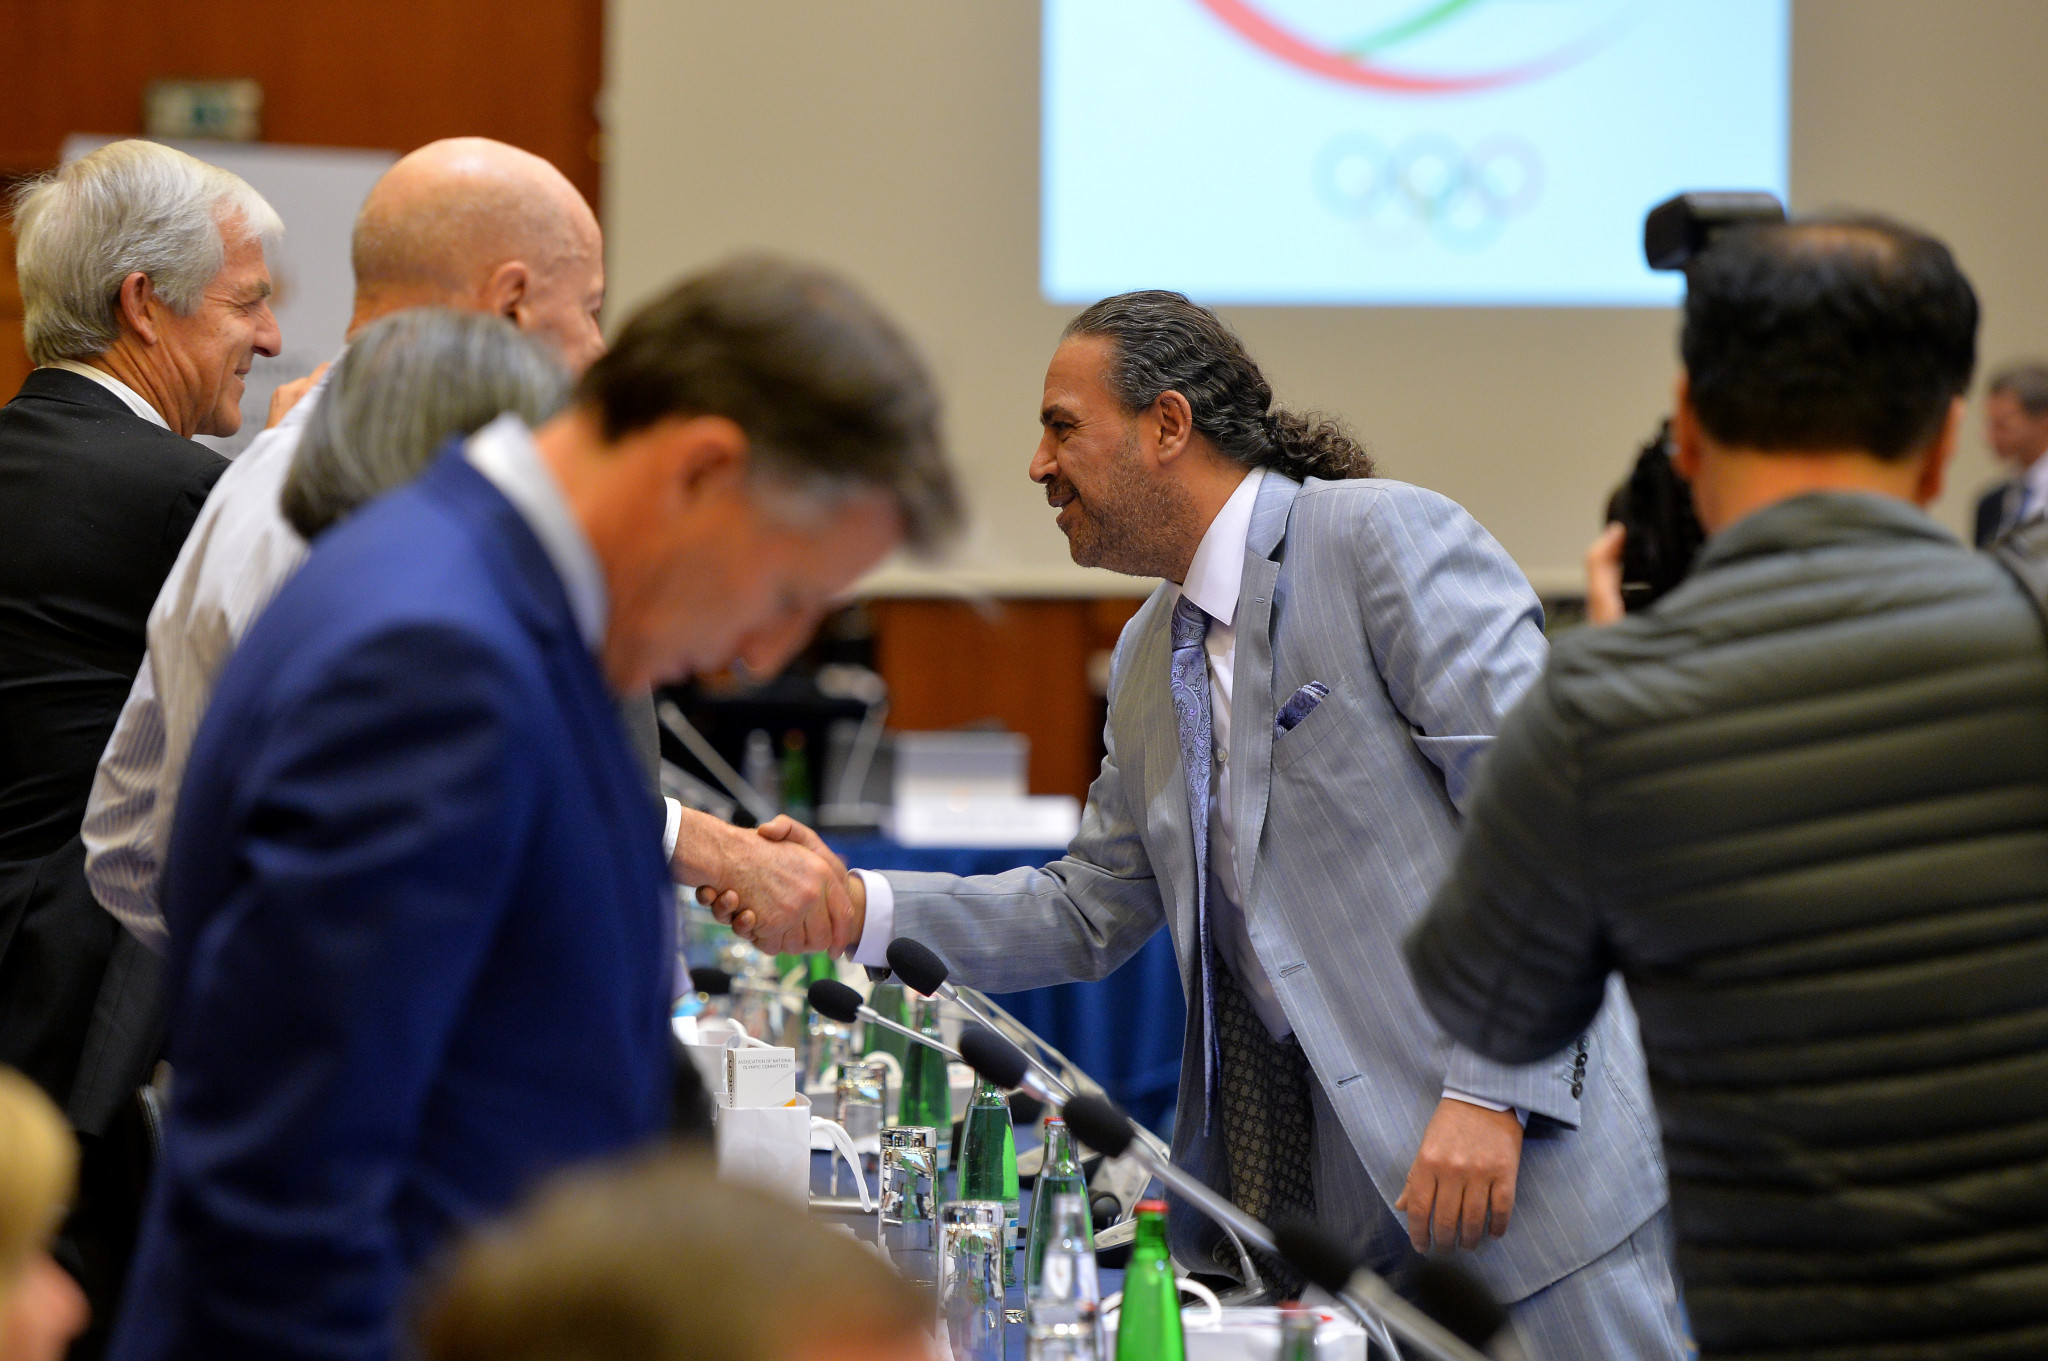 ANOC President Sheikh Ahmad Al-Fahad Al-Sabah greets delegates including IAAF President Sebastian Coe at the start of the meeting today ©Getty Images